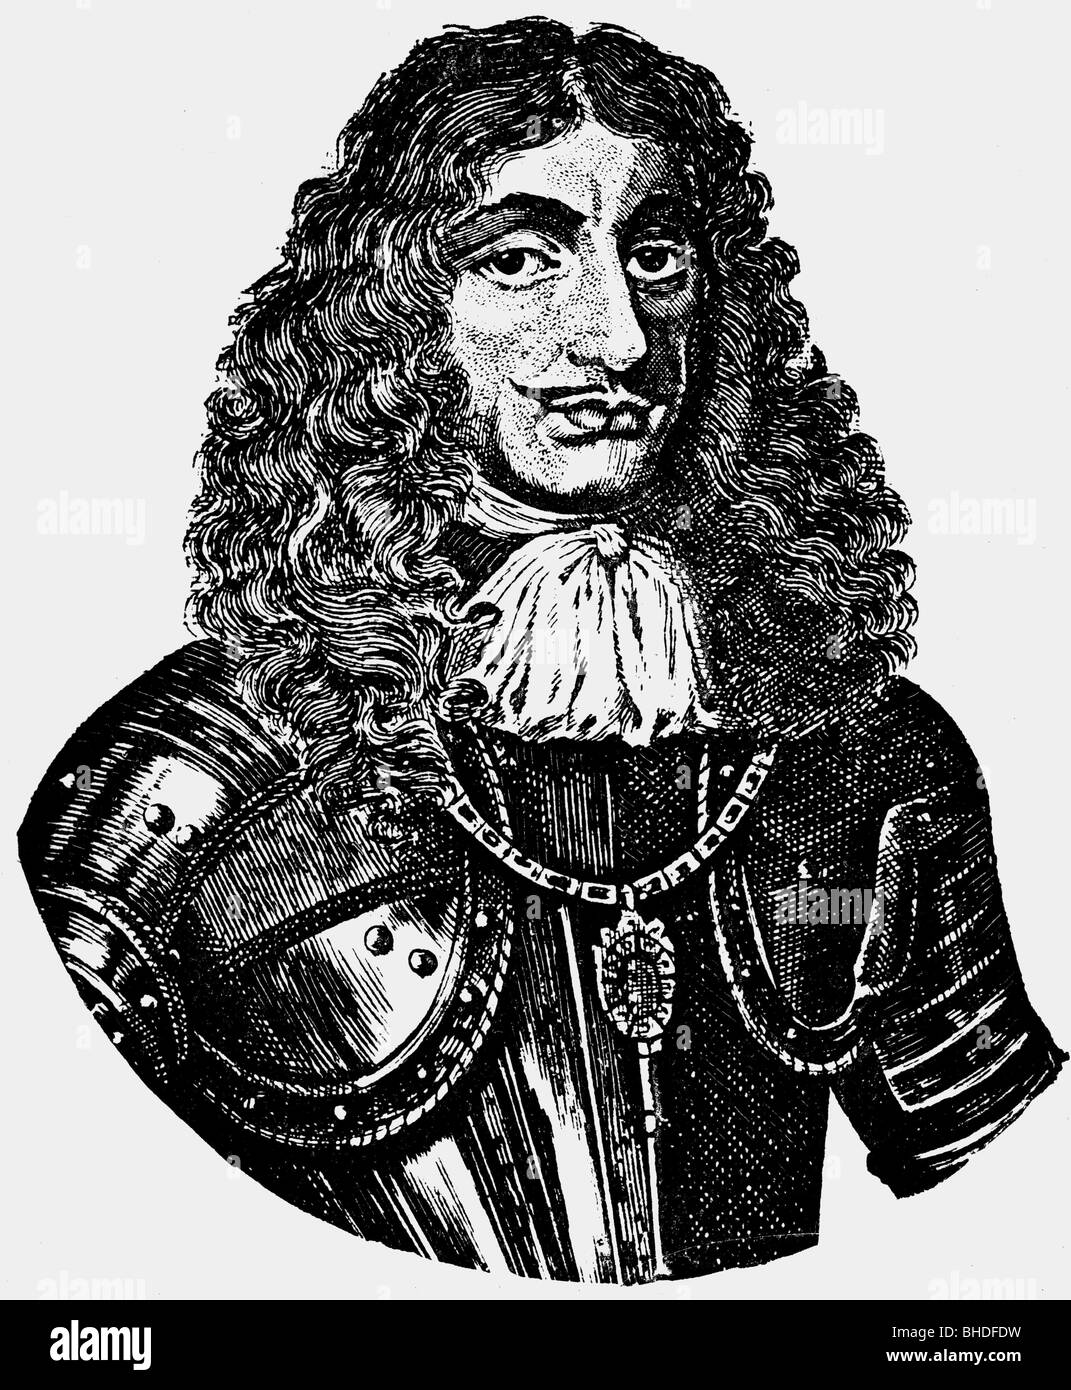 Charles II, 29.5.1630 - 6.2.1685, King of England 29.5.1660 - 29.5.1685, portrait, ink drawing, 19th century, , Stock Photo